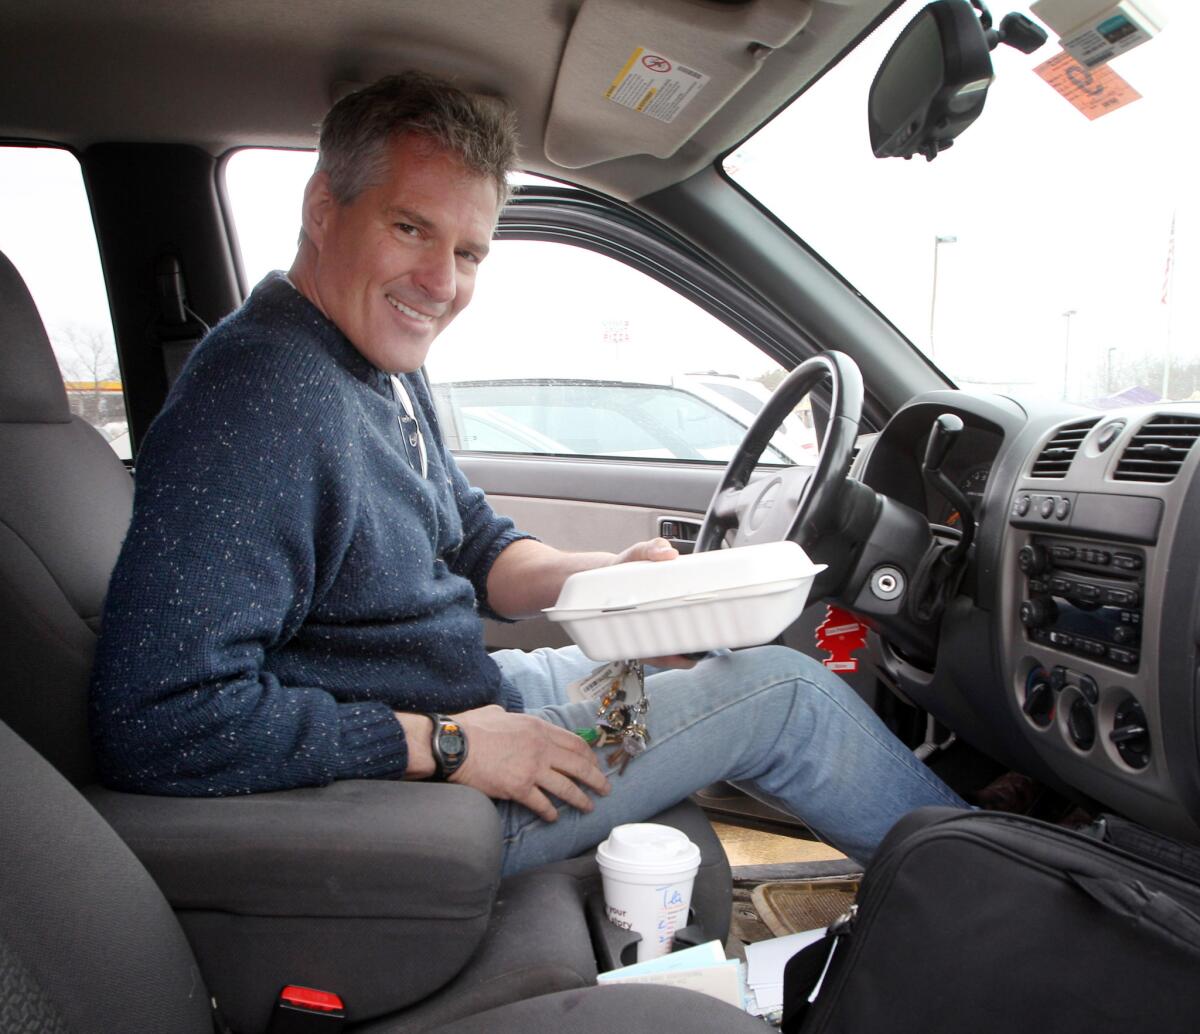 Former Massachusetts Sen. Scott Brown, seen in this file photo from March, easily won the Republican nomination for the U.S. Senate seat from New Hampshire.